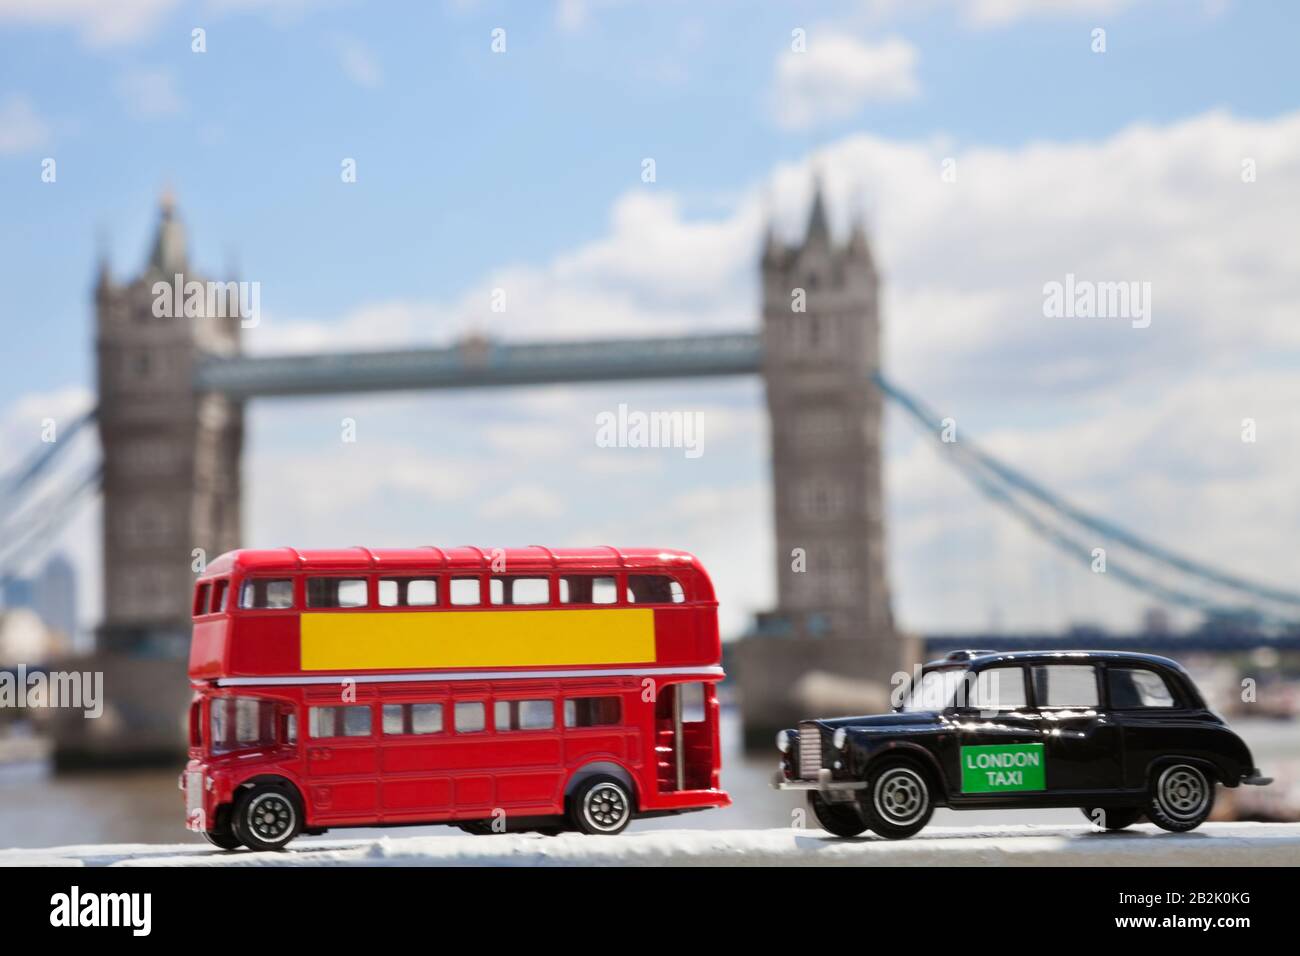 Close-up view of public transport figurines with London Bridge in the background Stock Photo